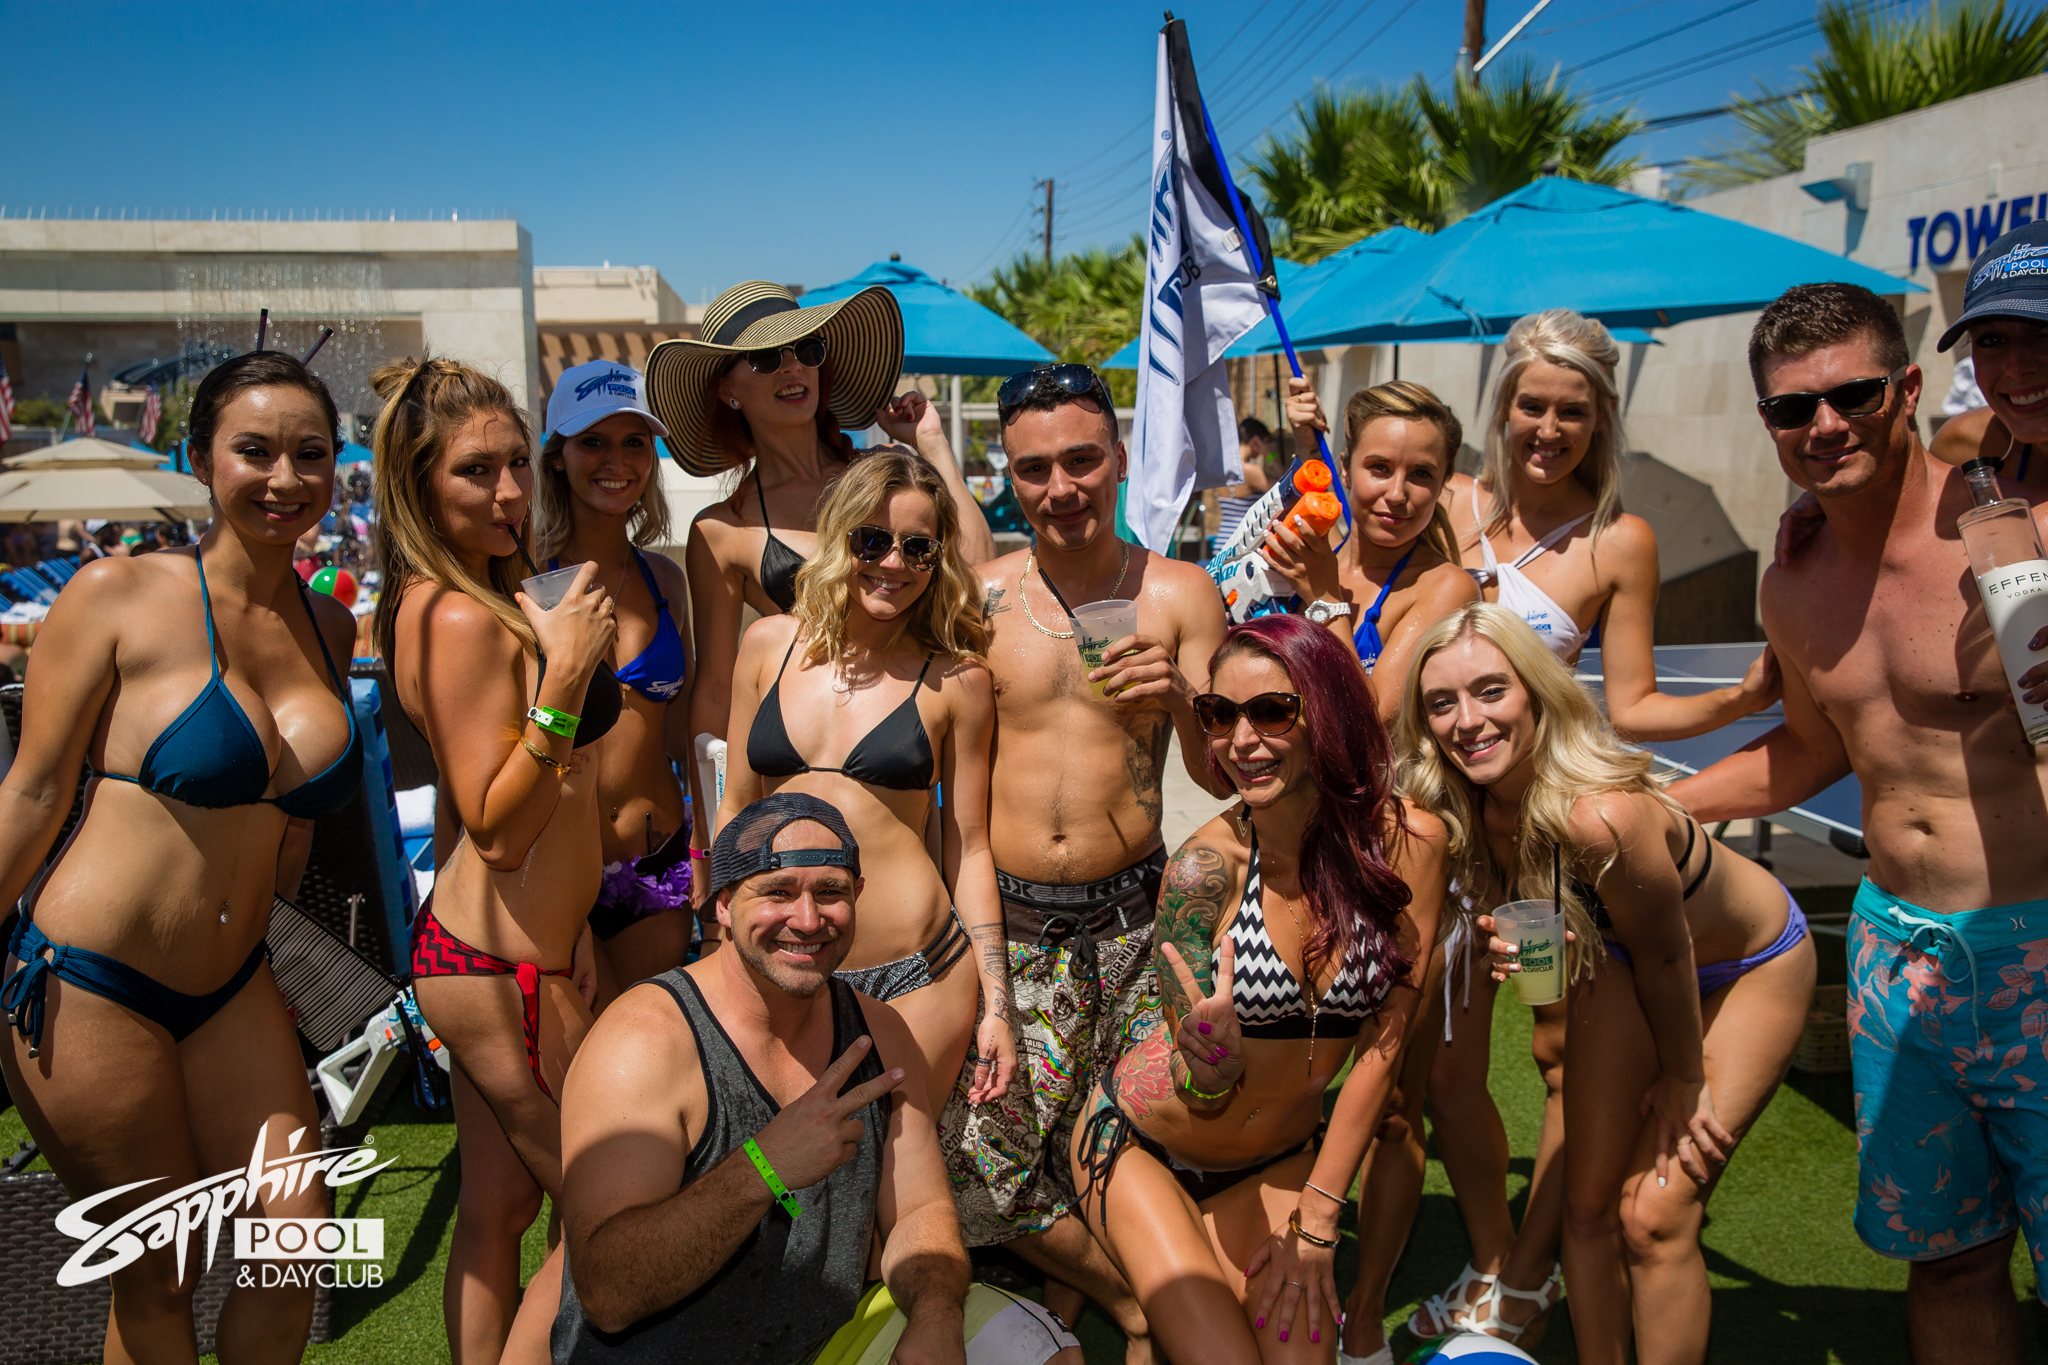 No matter the occasion, the Sapphire Day Club VIP pool cabana experience is...